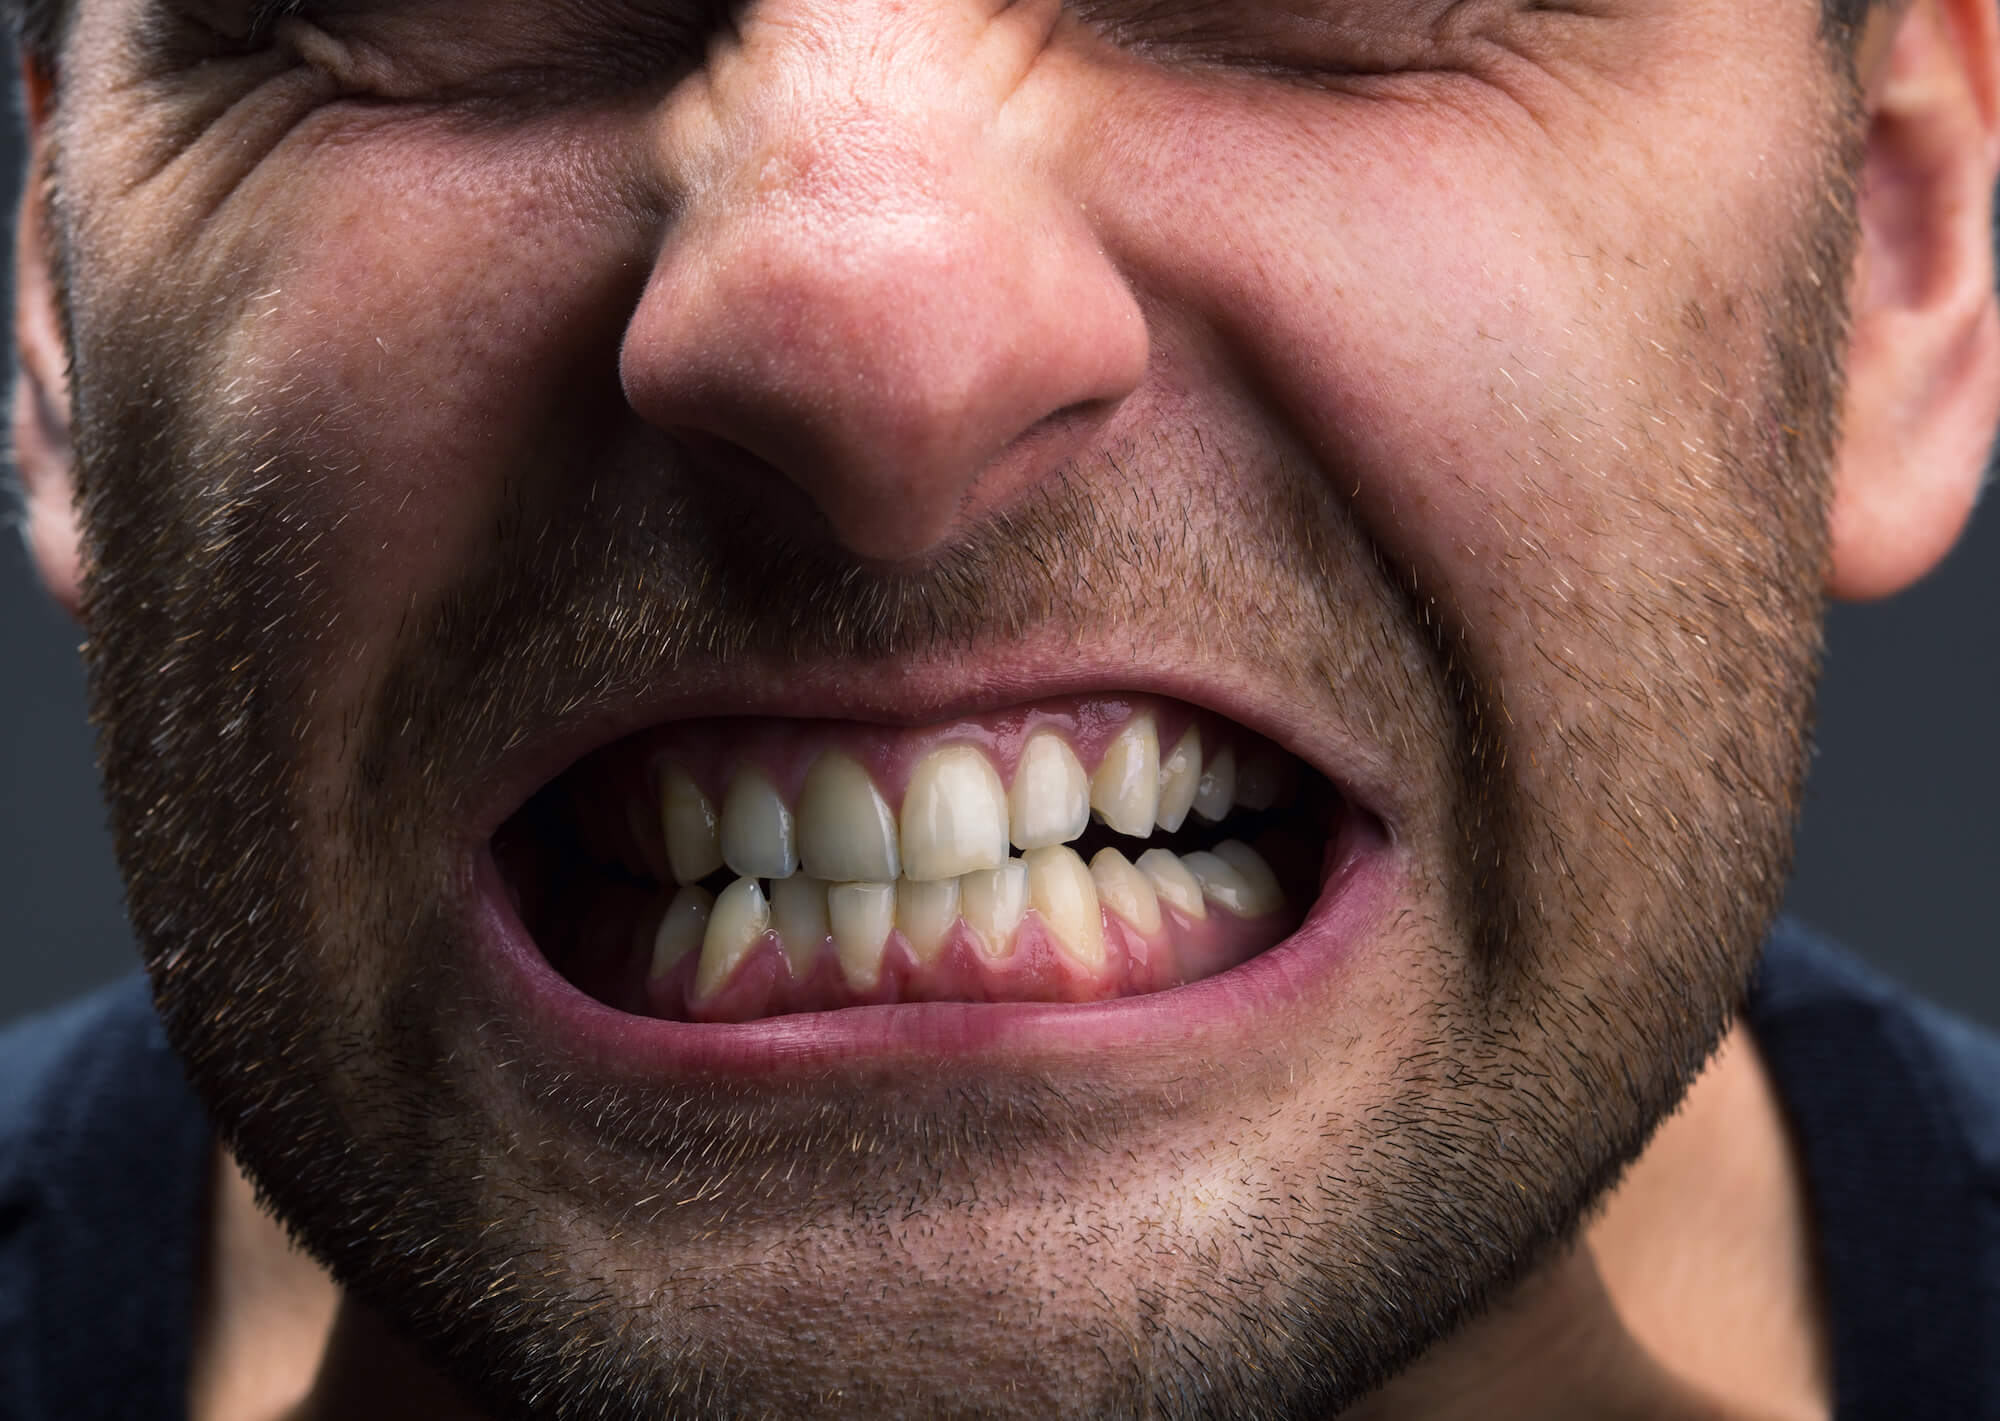 grinding and clenching teeth causes gum recession